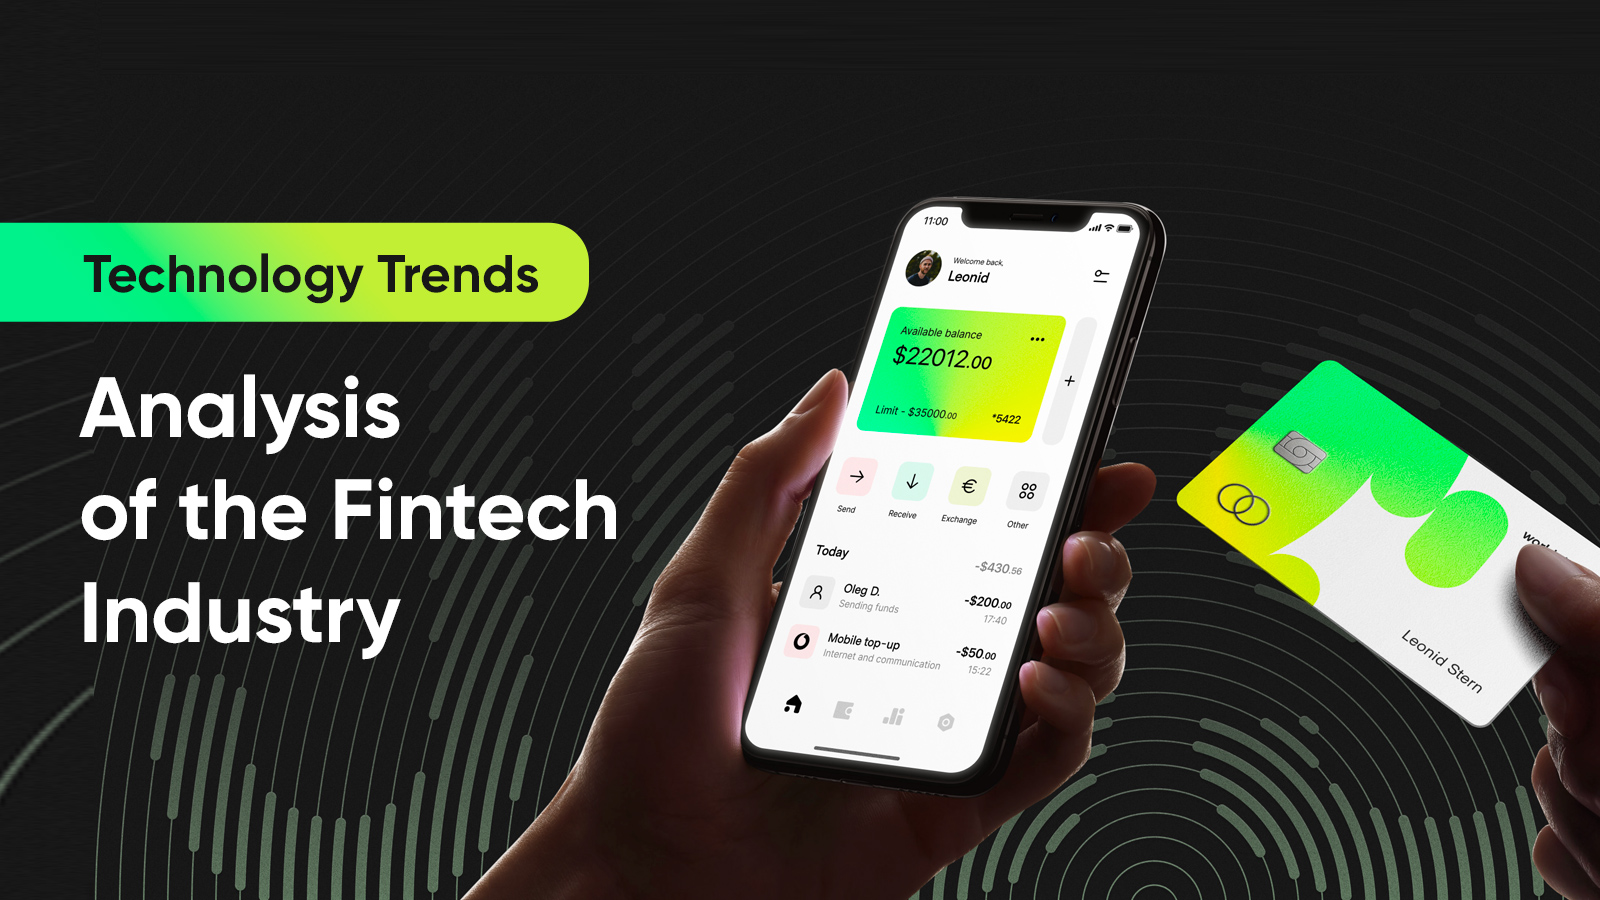 Technology Trends Analysis of the Fintech Industry